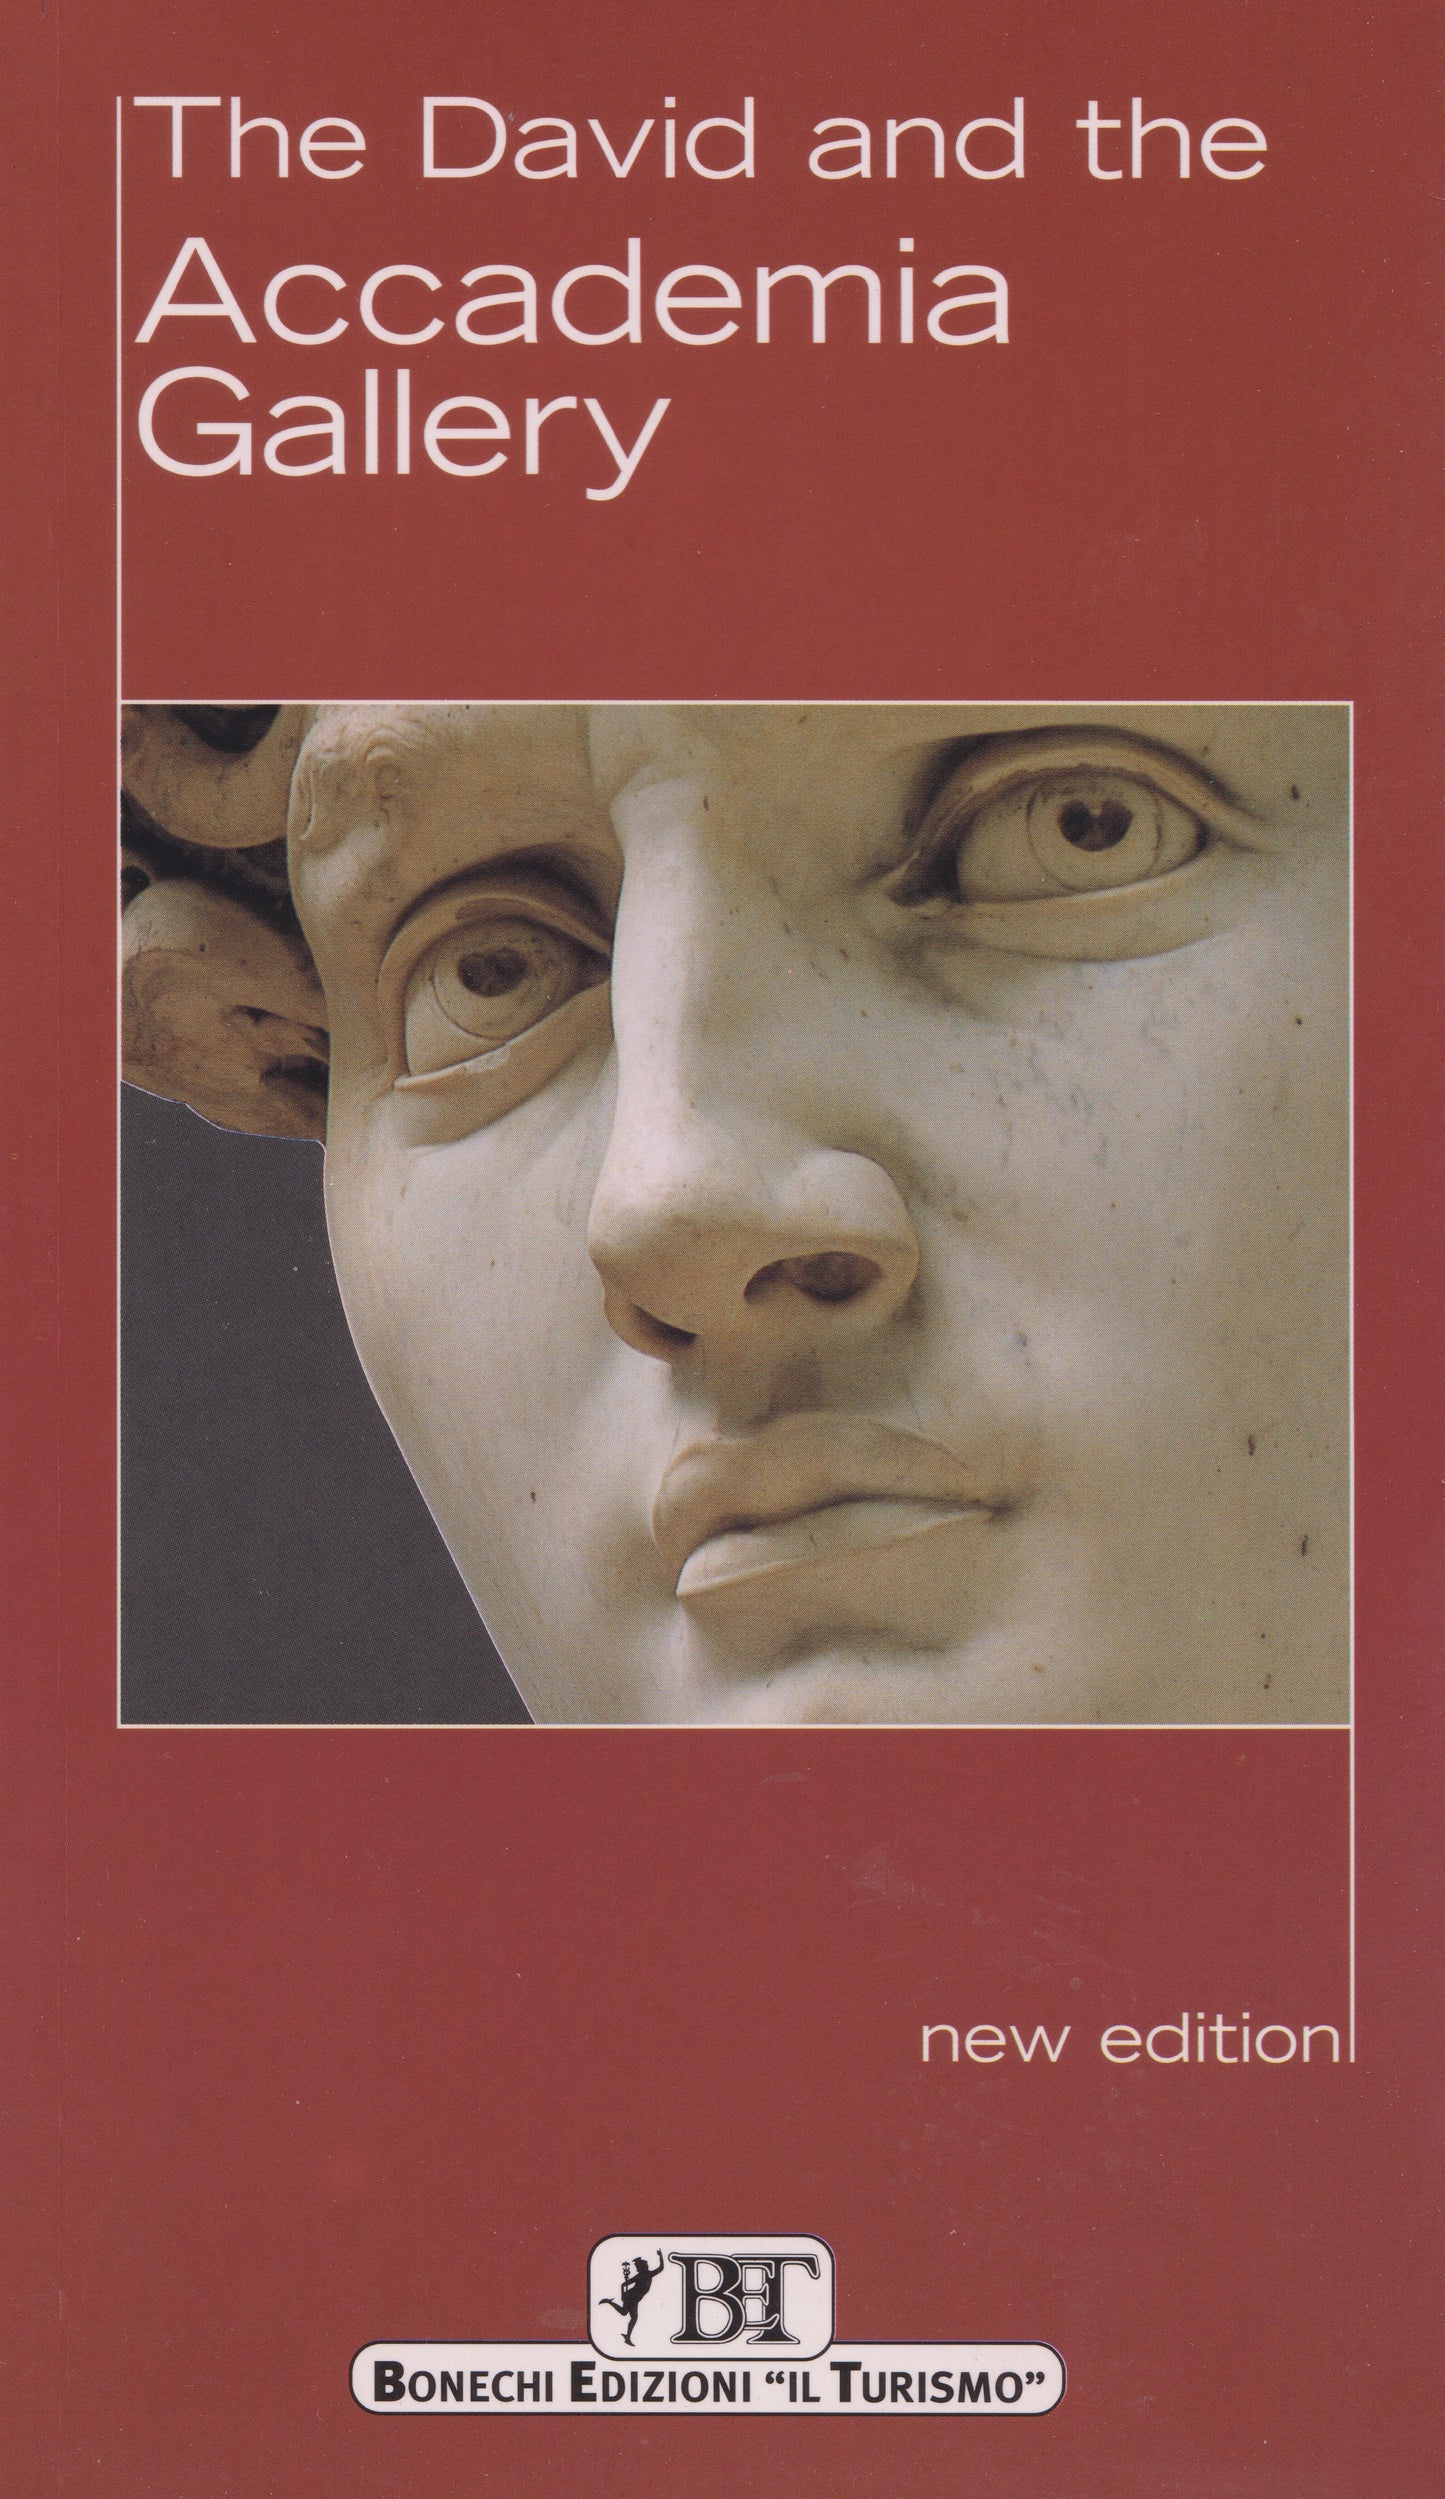 The David and the Accademia Gallery -  English Edition